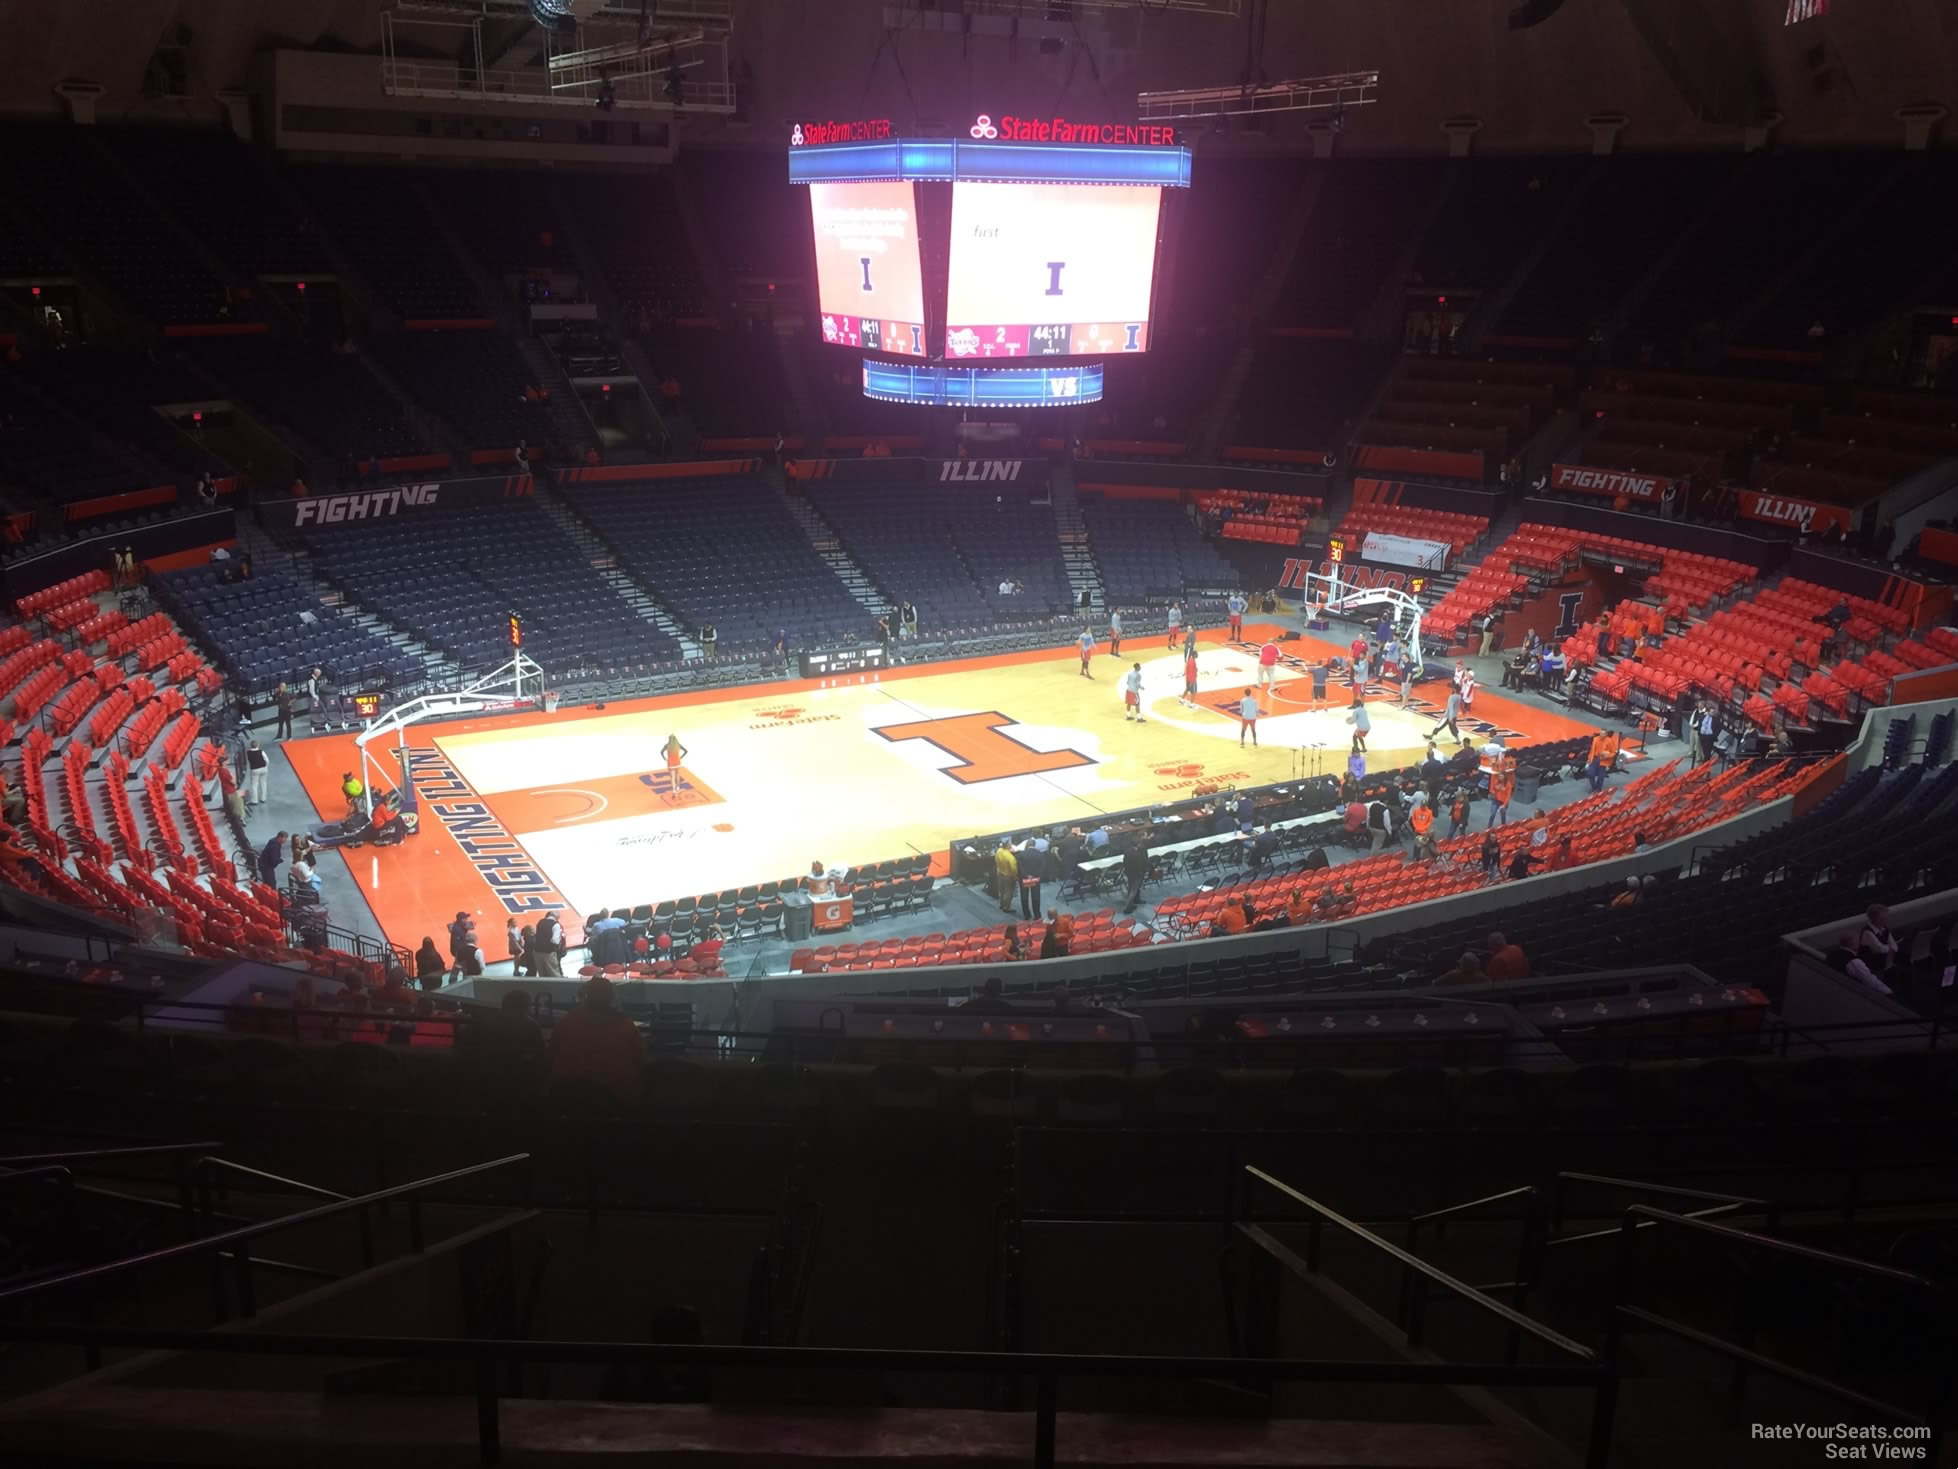 section 229, row 10 seat view  - state farm center